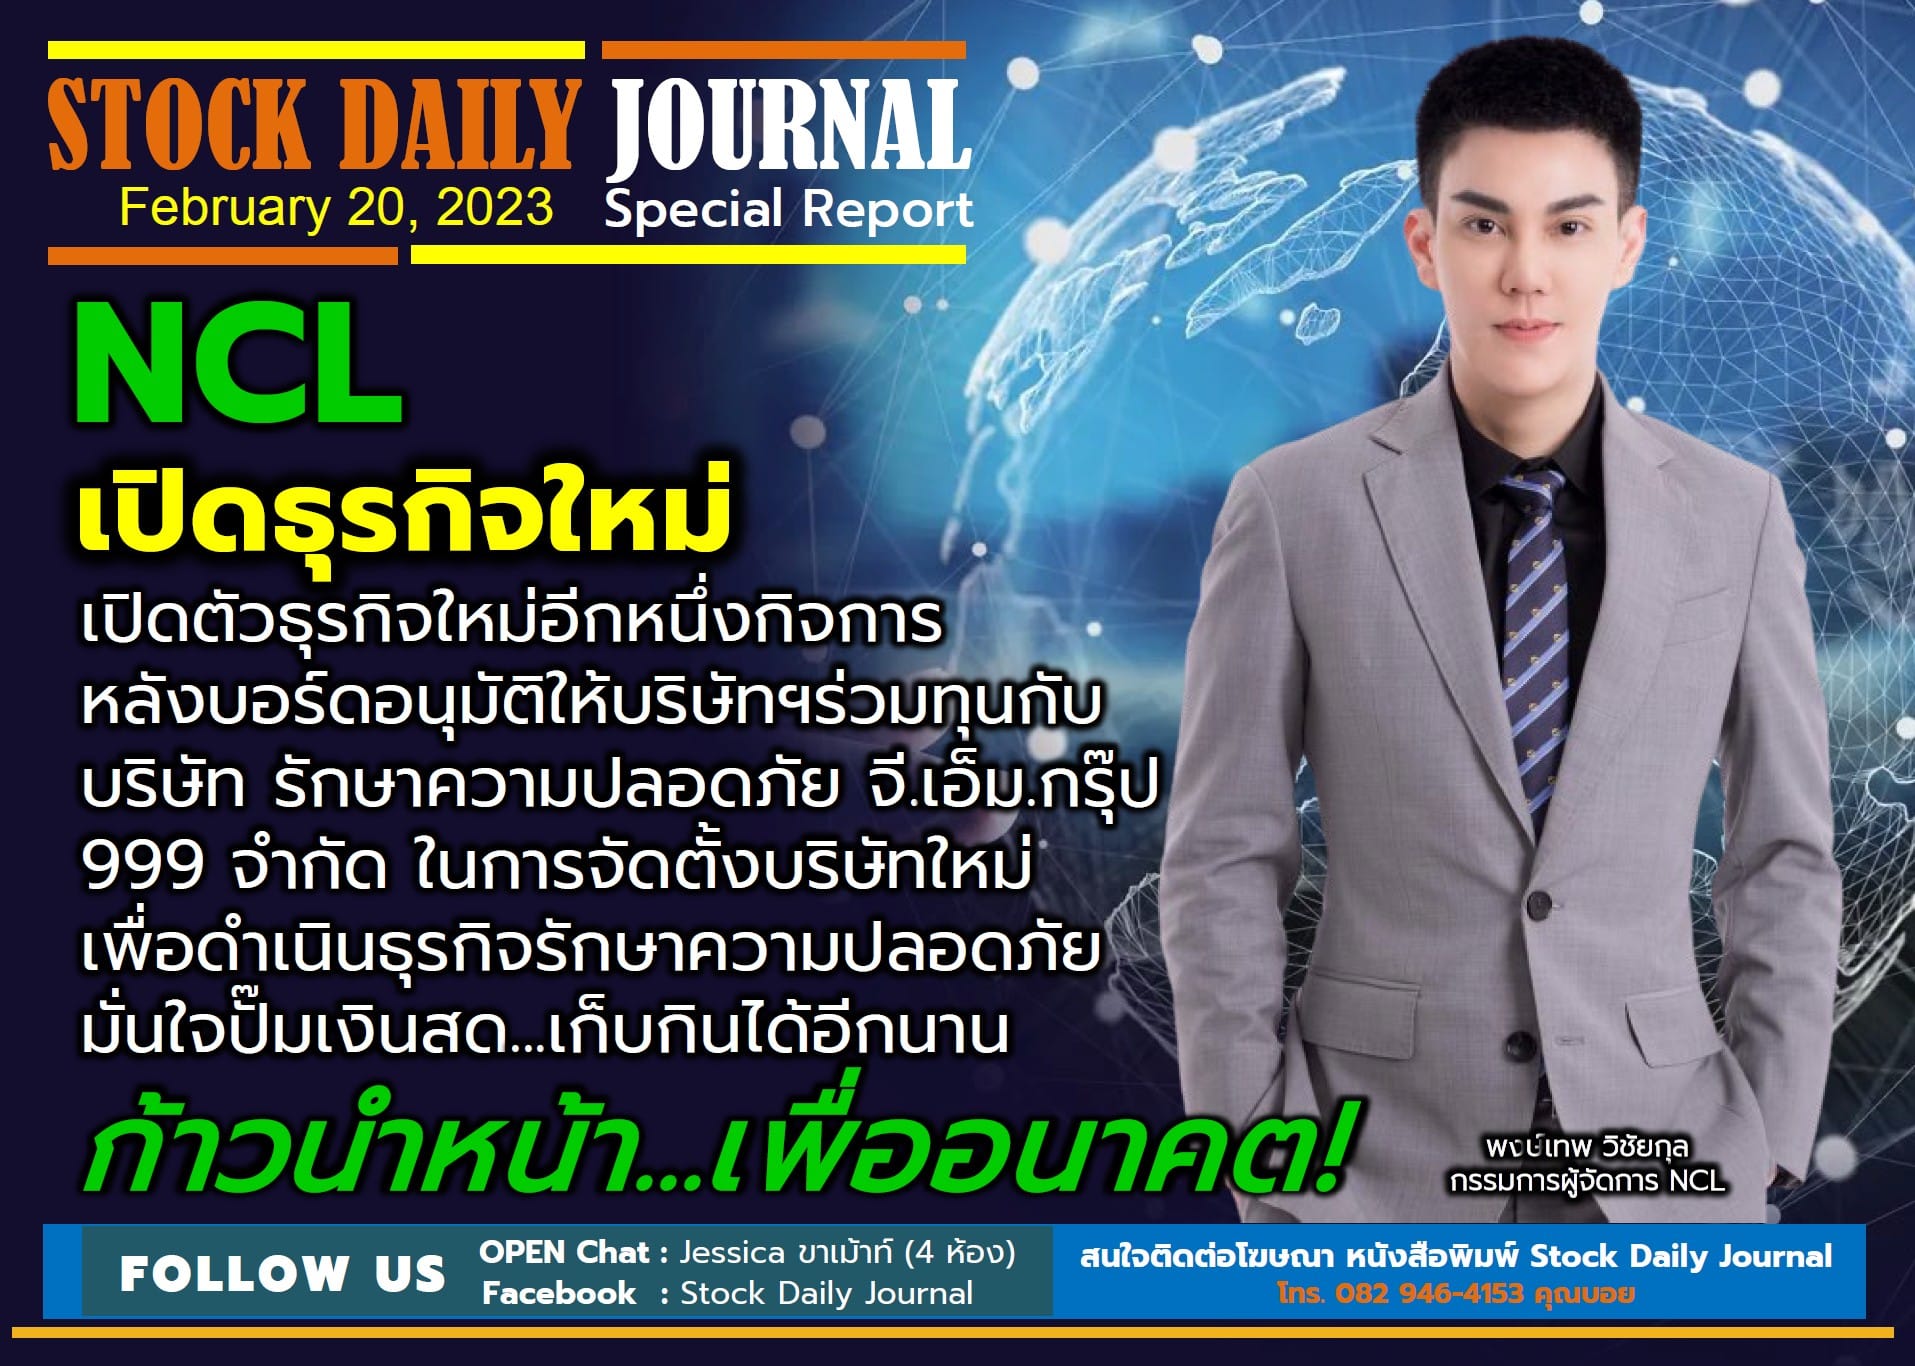 STOCK DAILY JOURNAL “Special Report : NCL”